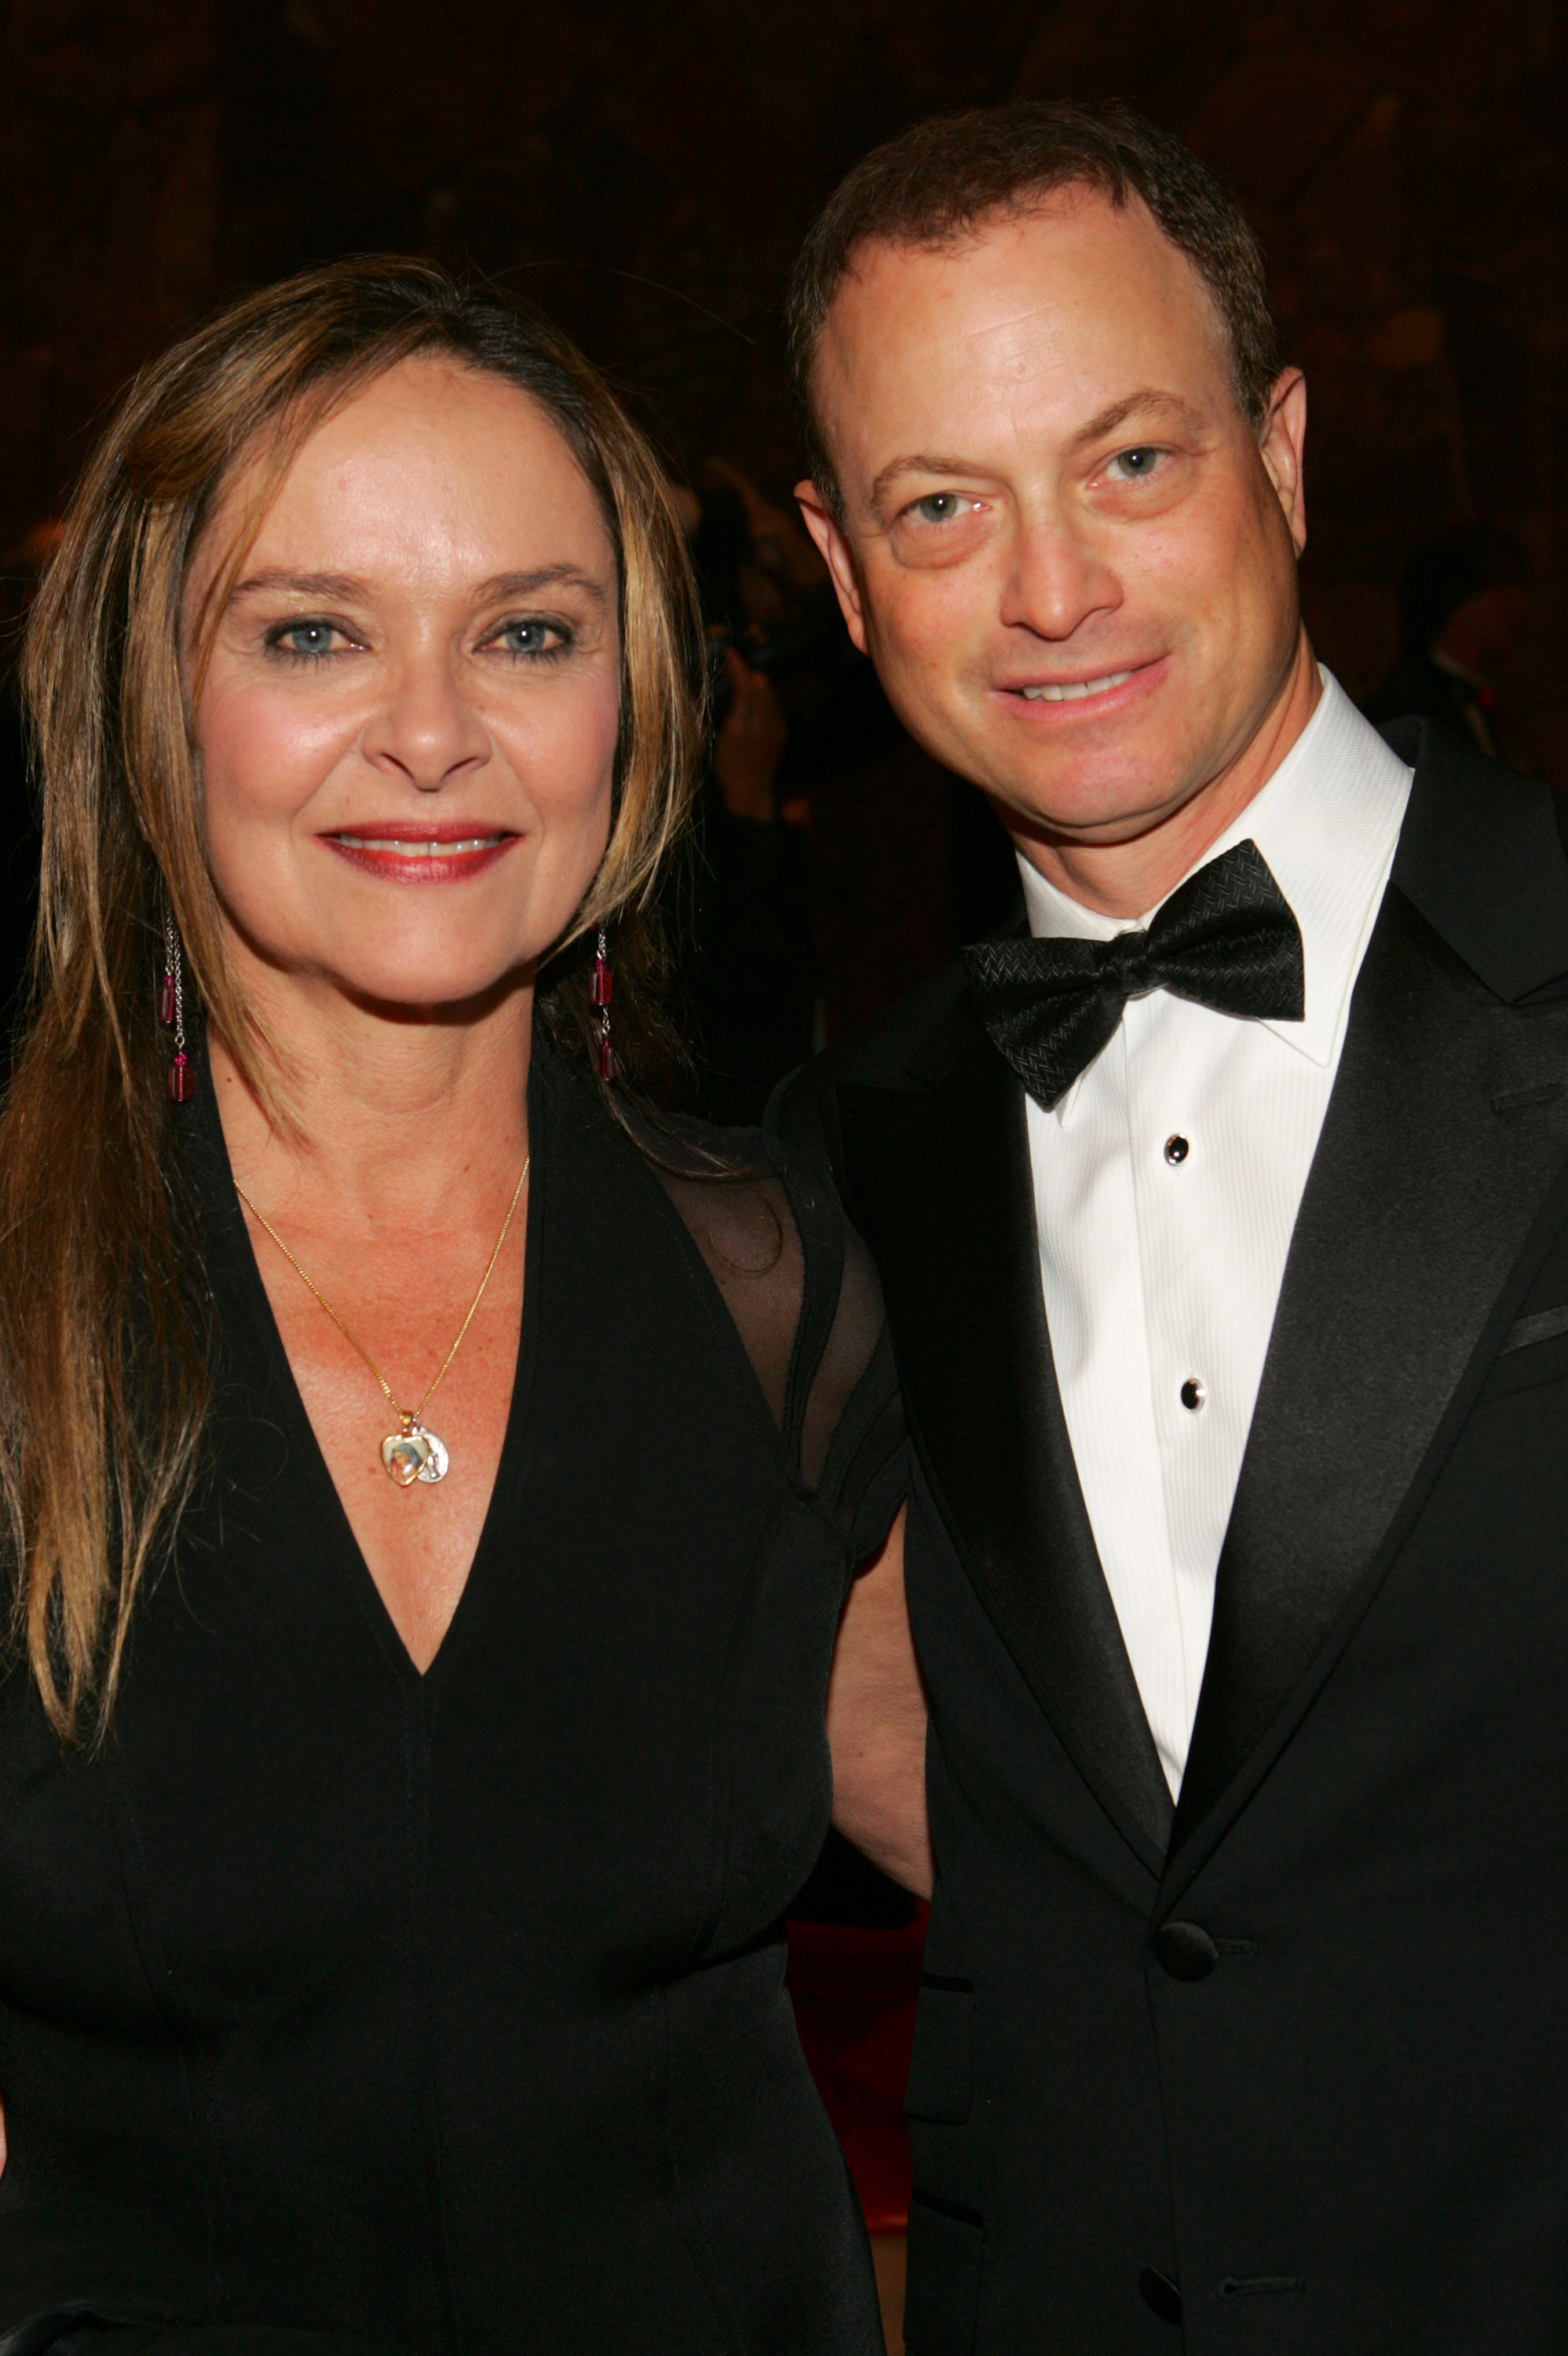 Moira Harris and Gary Sinise during 17th Annual Palm Springs International Film Festival Gala Awards Presentation - Red Carpet at Palm Springs Convention Center in Palm Springs, California, on January 7, 2006. | Source: Getty Images